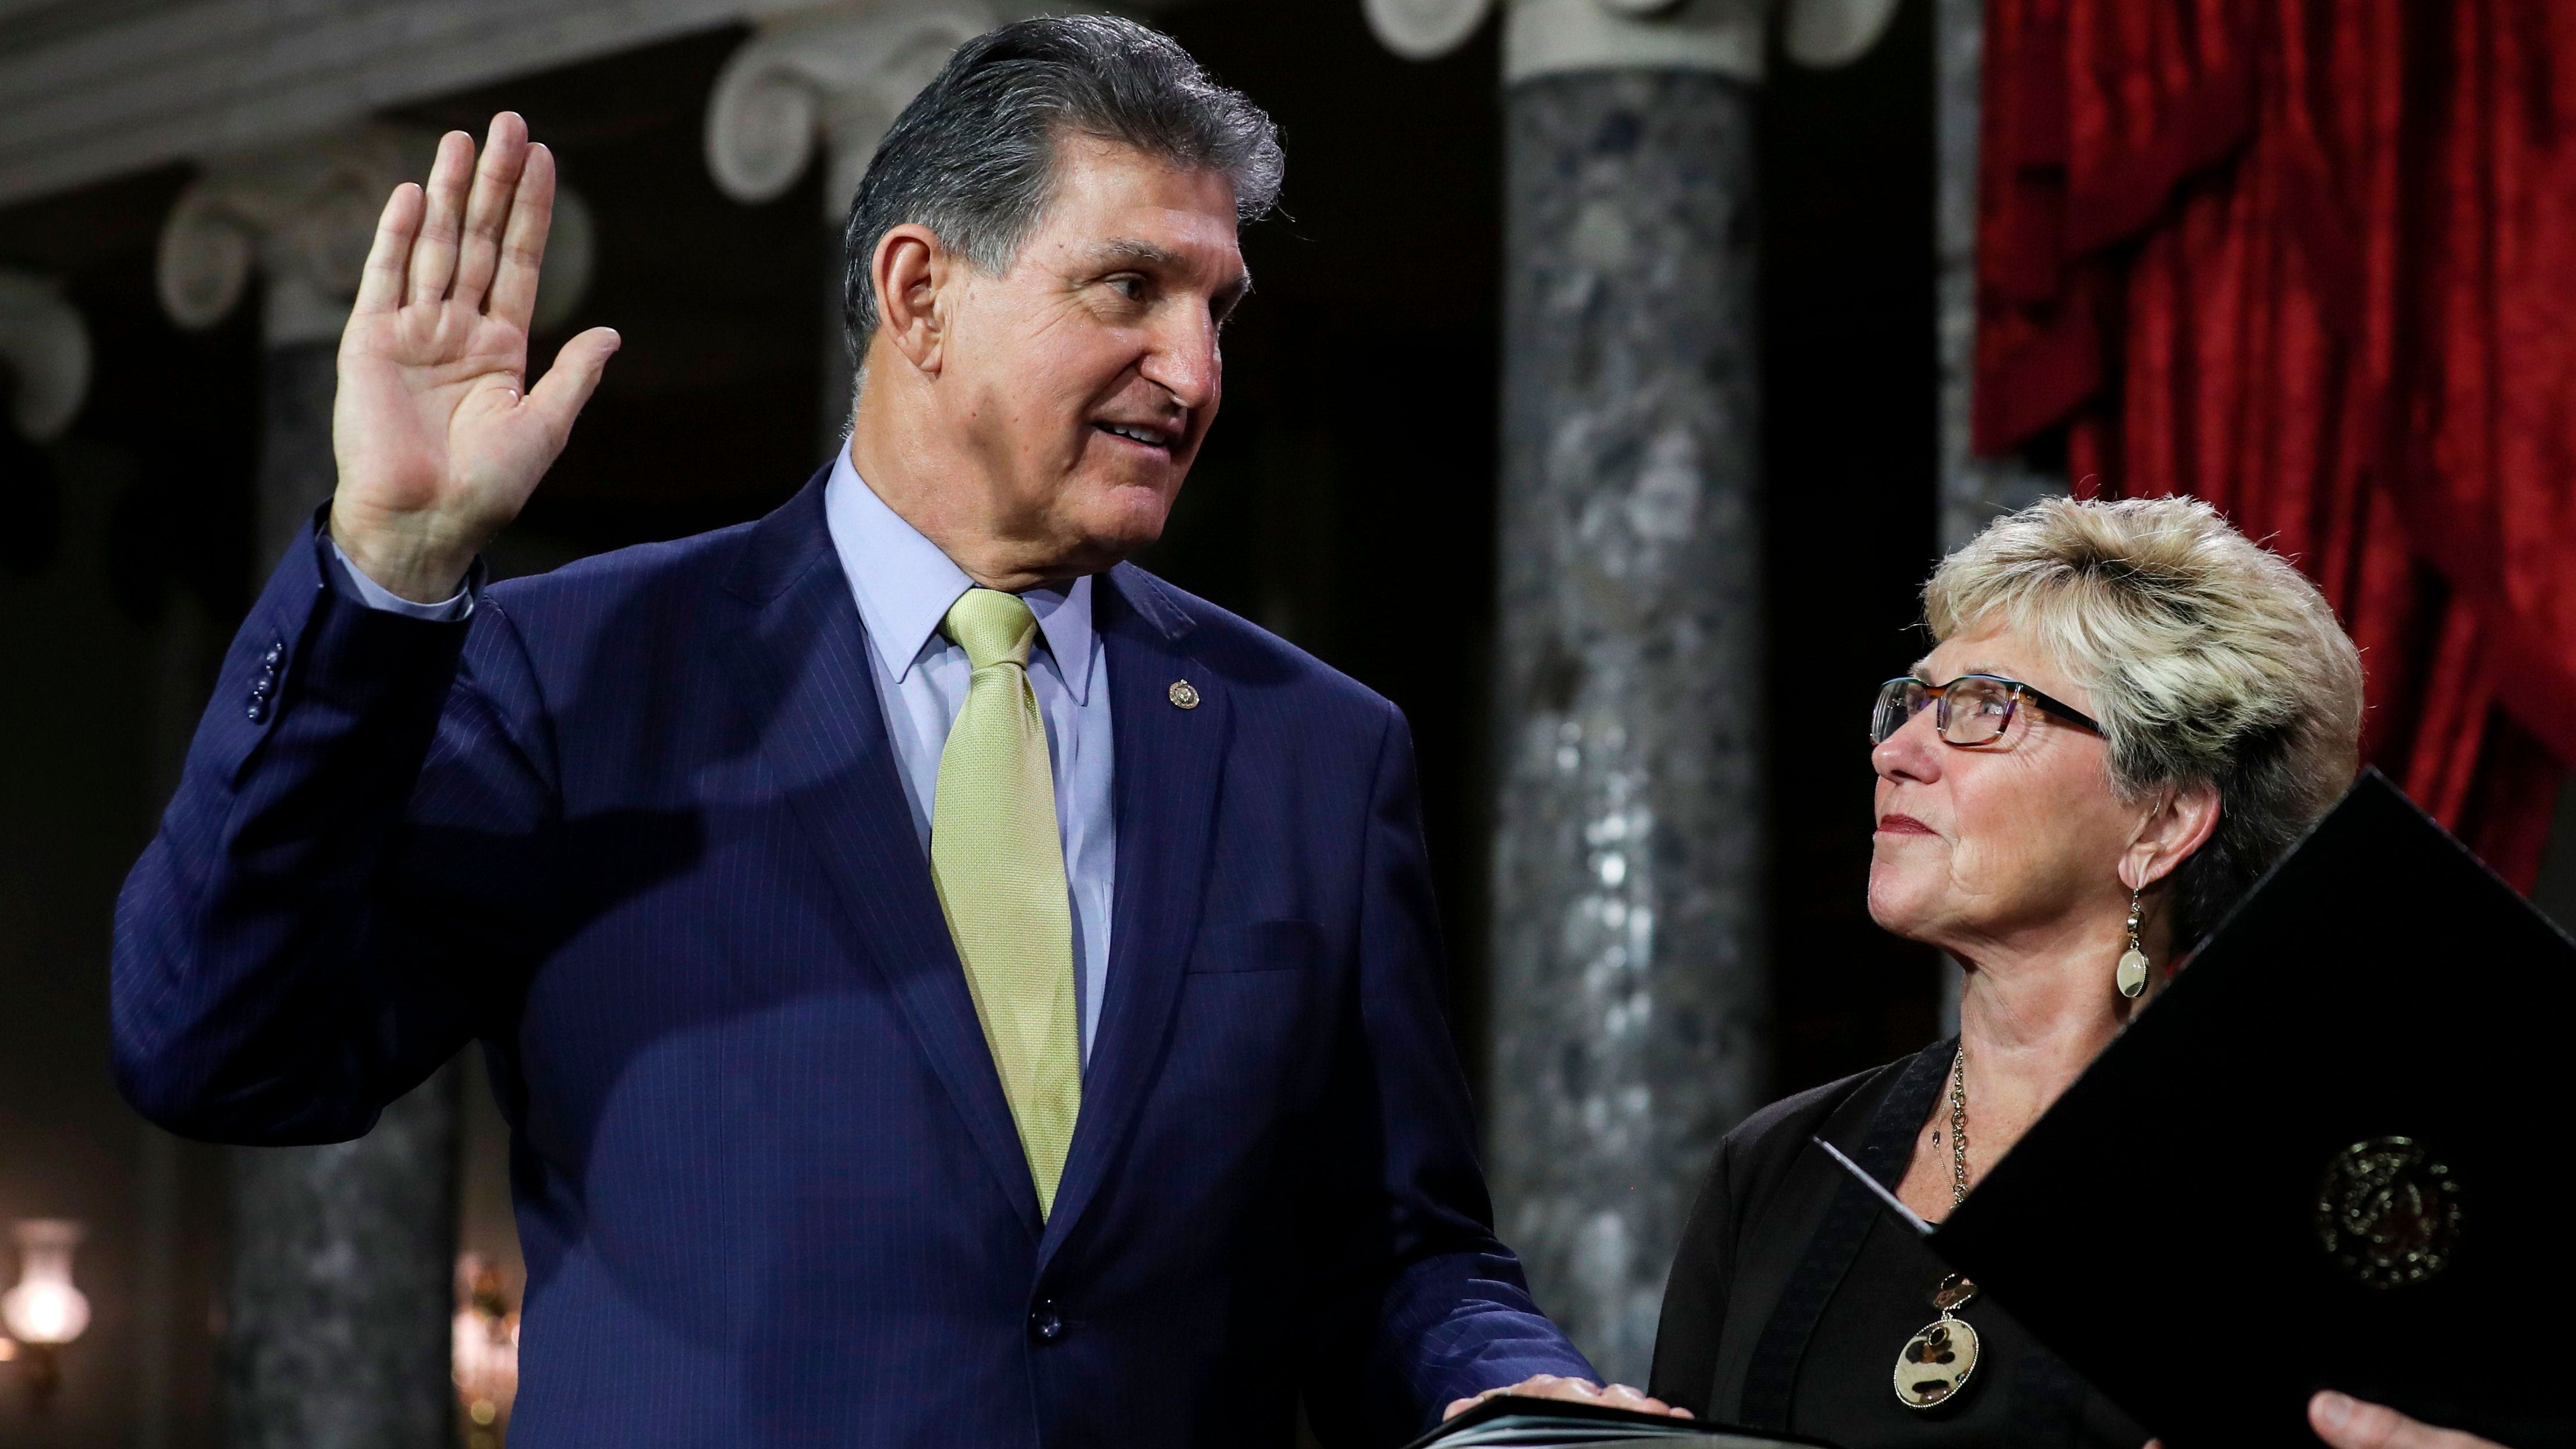 Manchin’s wife broke 'conflicts of interest' ethics pledge, emails show